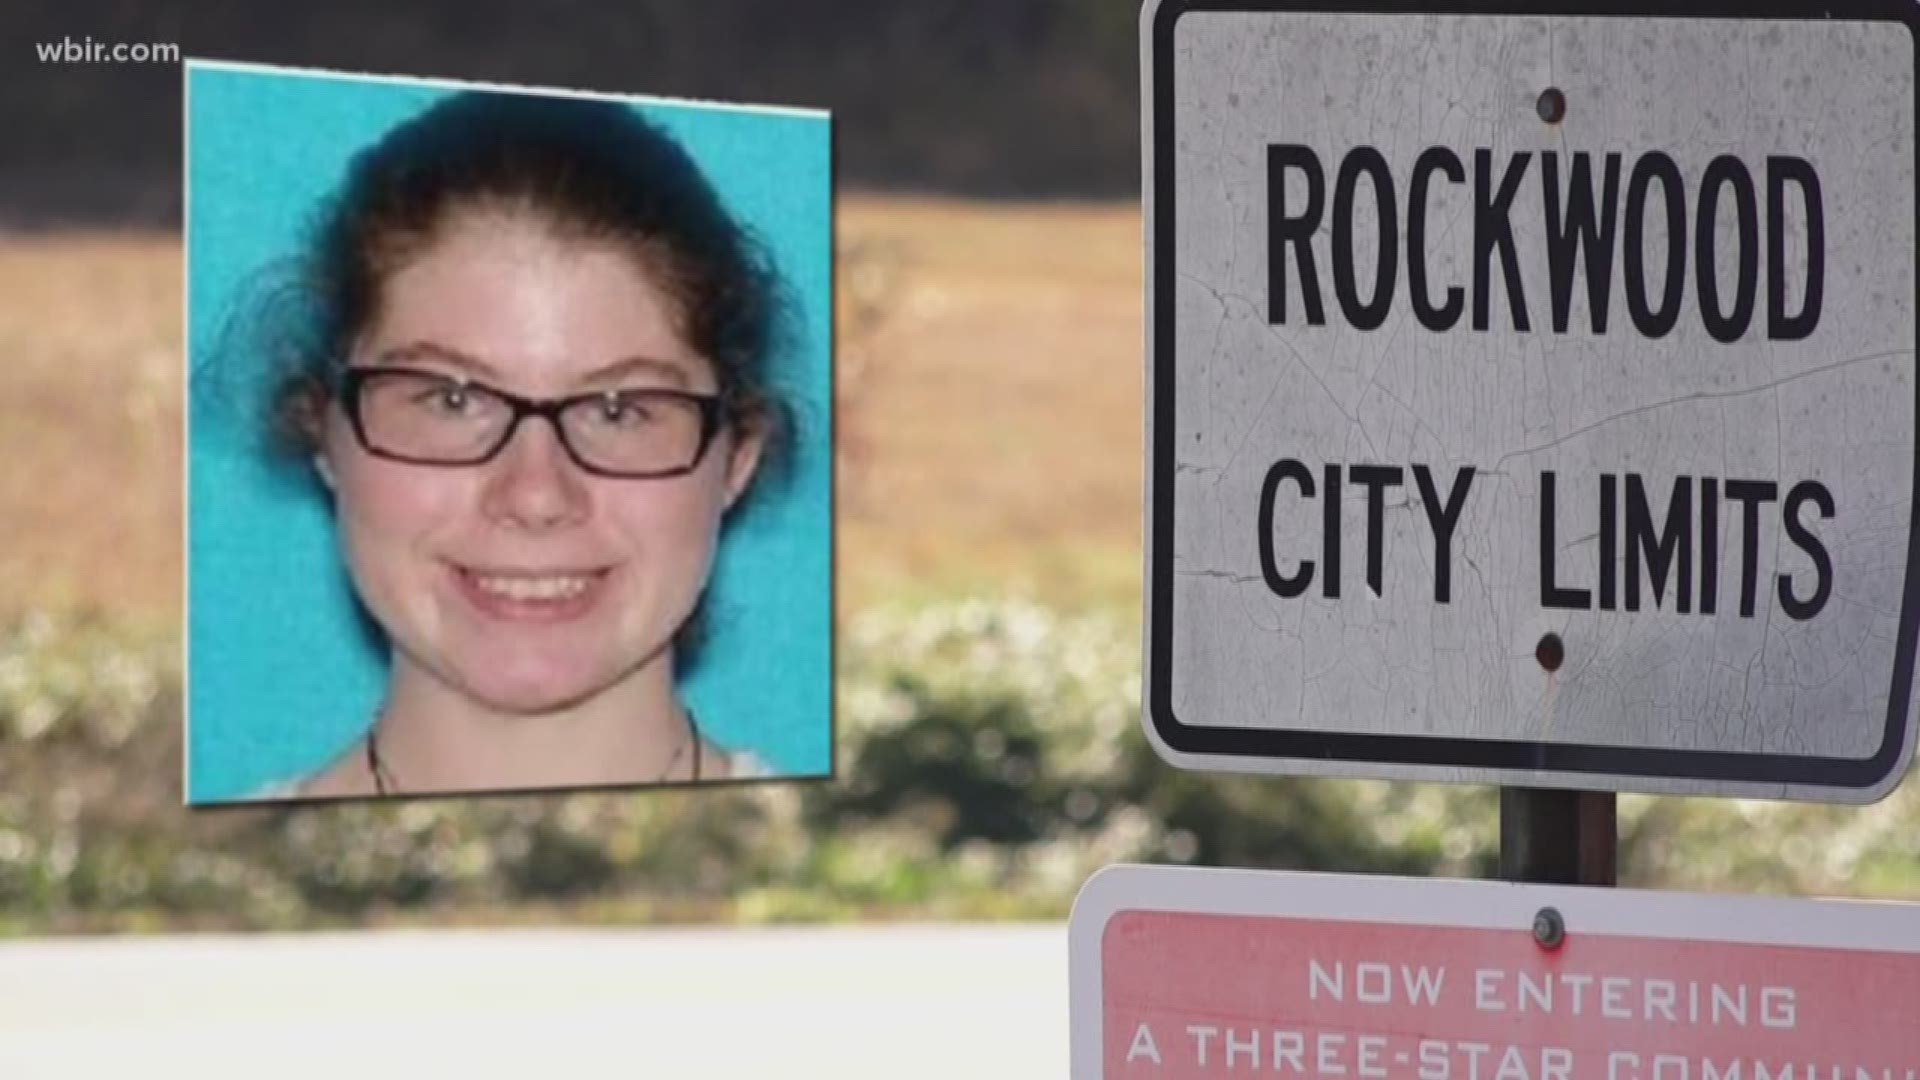 An East Tennessee community is relieved after a 17-year-old girl was found safe following an amber alert.